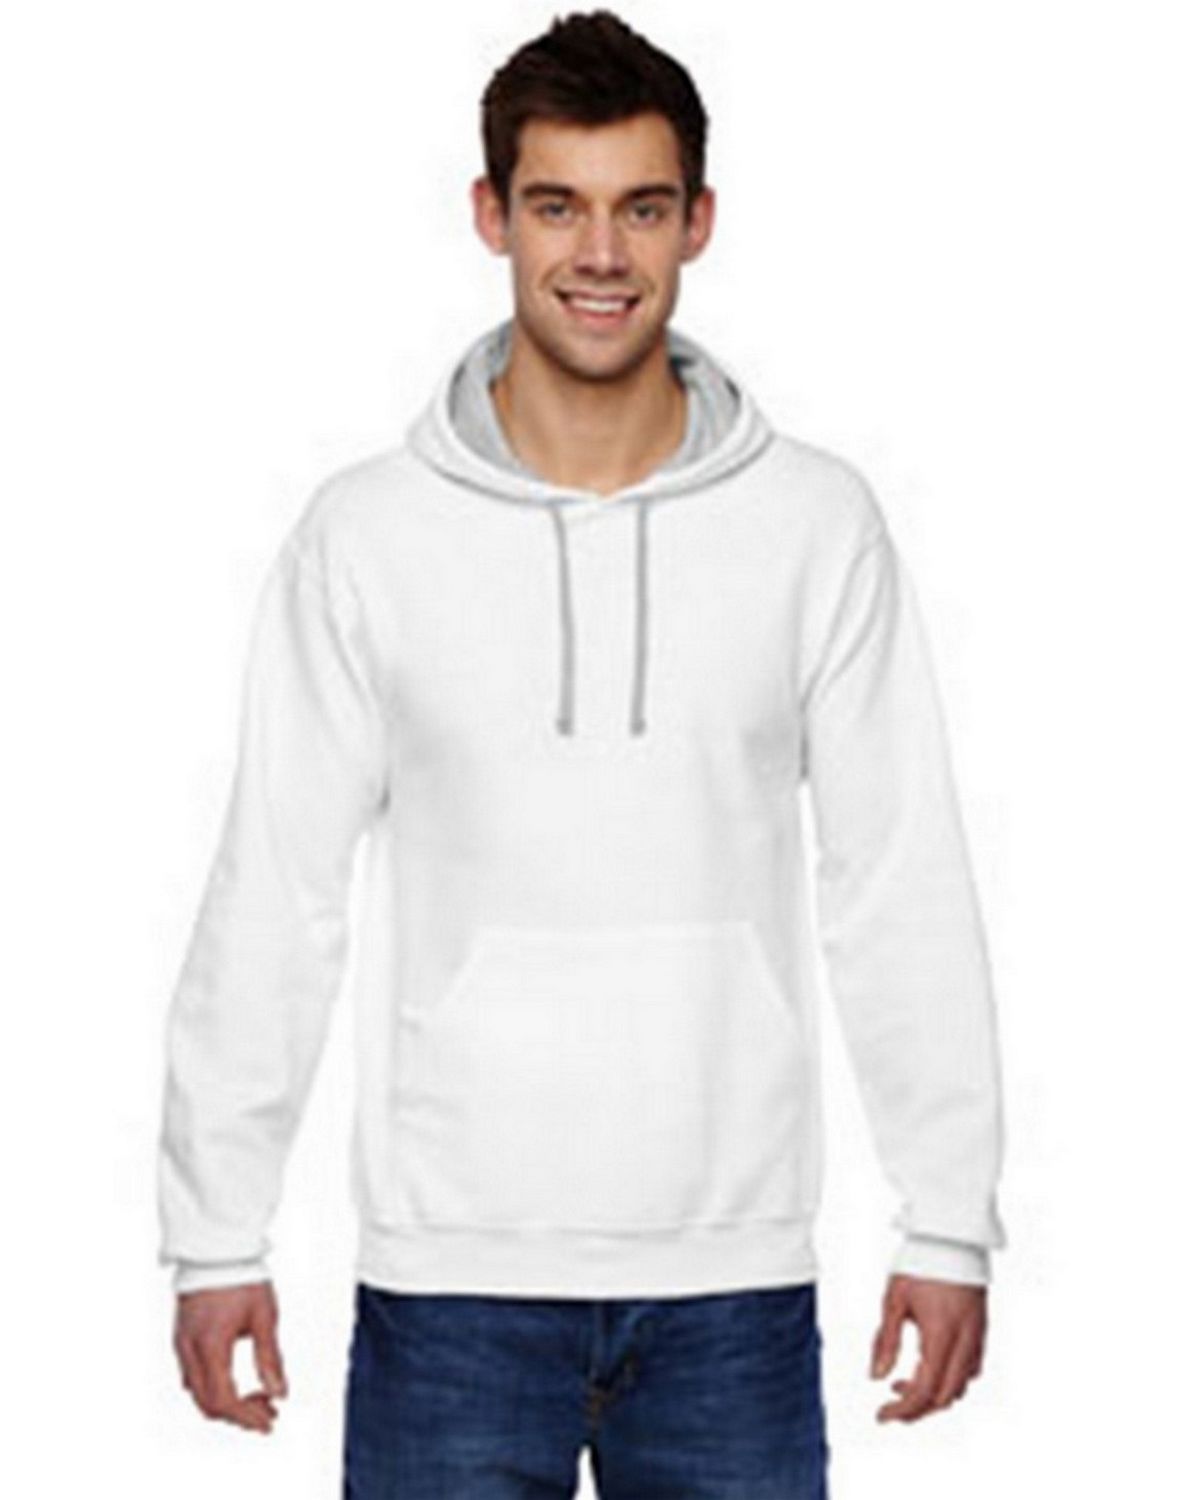 Size Chart for Fruit of the Loom SF76R Mens Sofspun Hooded Sweatshirt ...